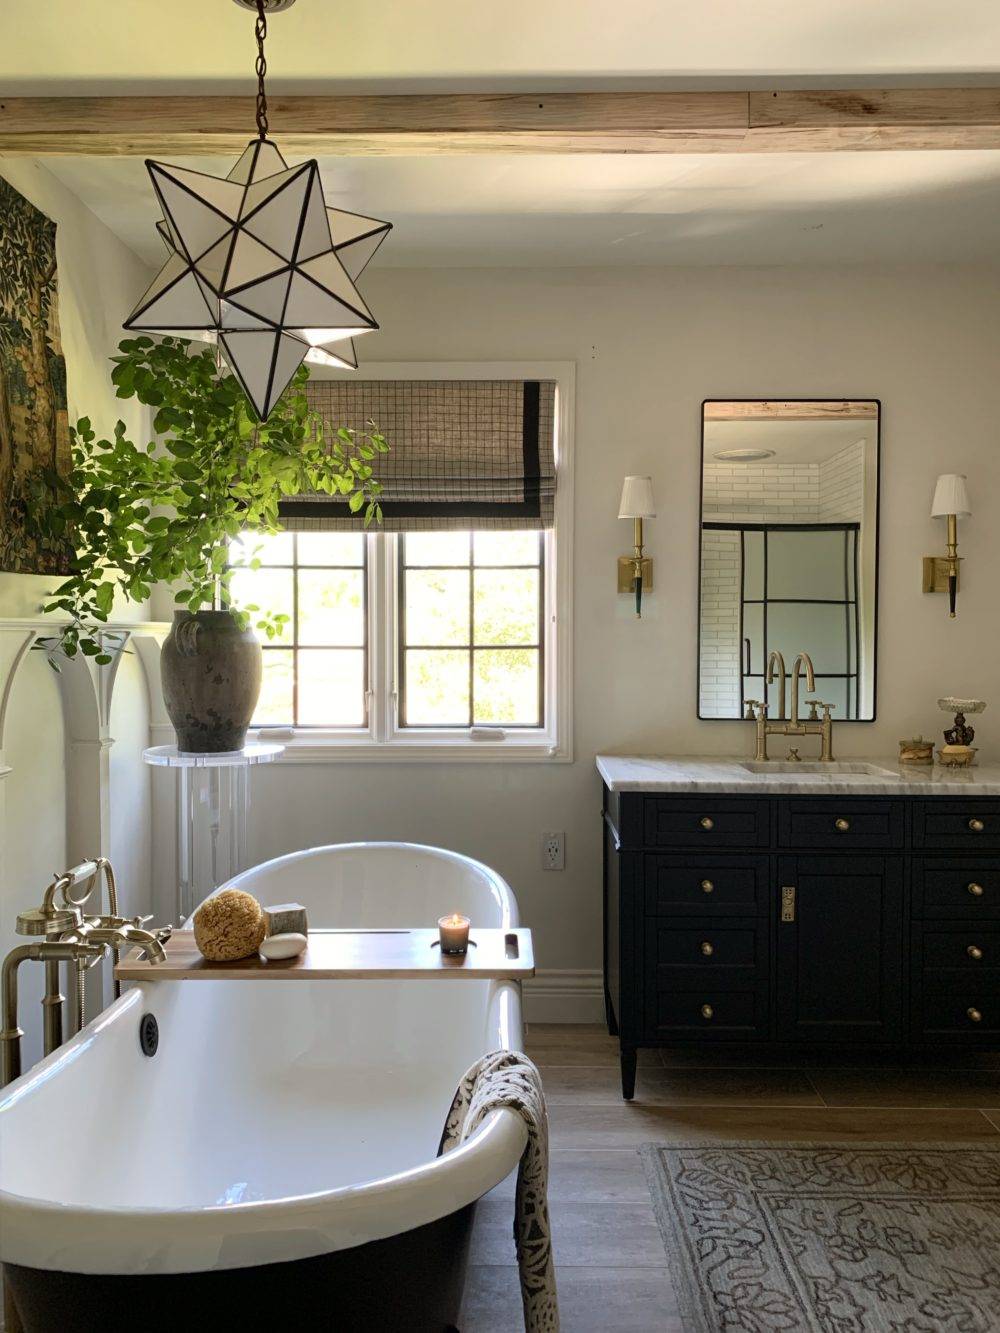 Traditional primary bathroom with wood-look tile flooring and black cabinetry